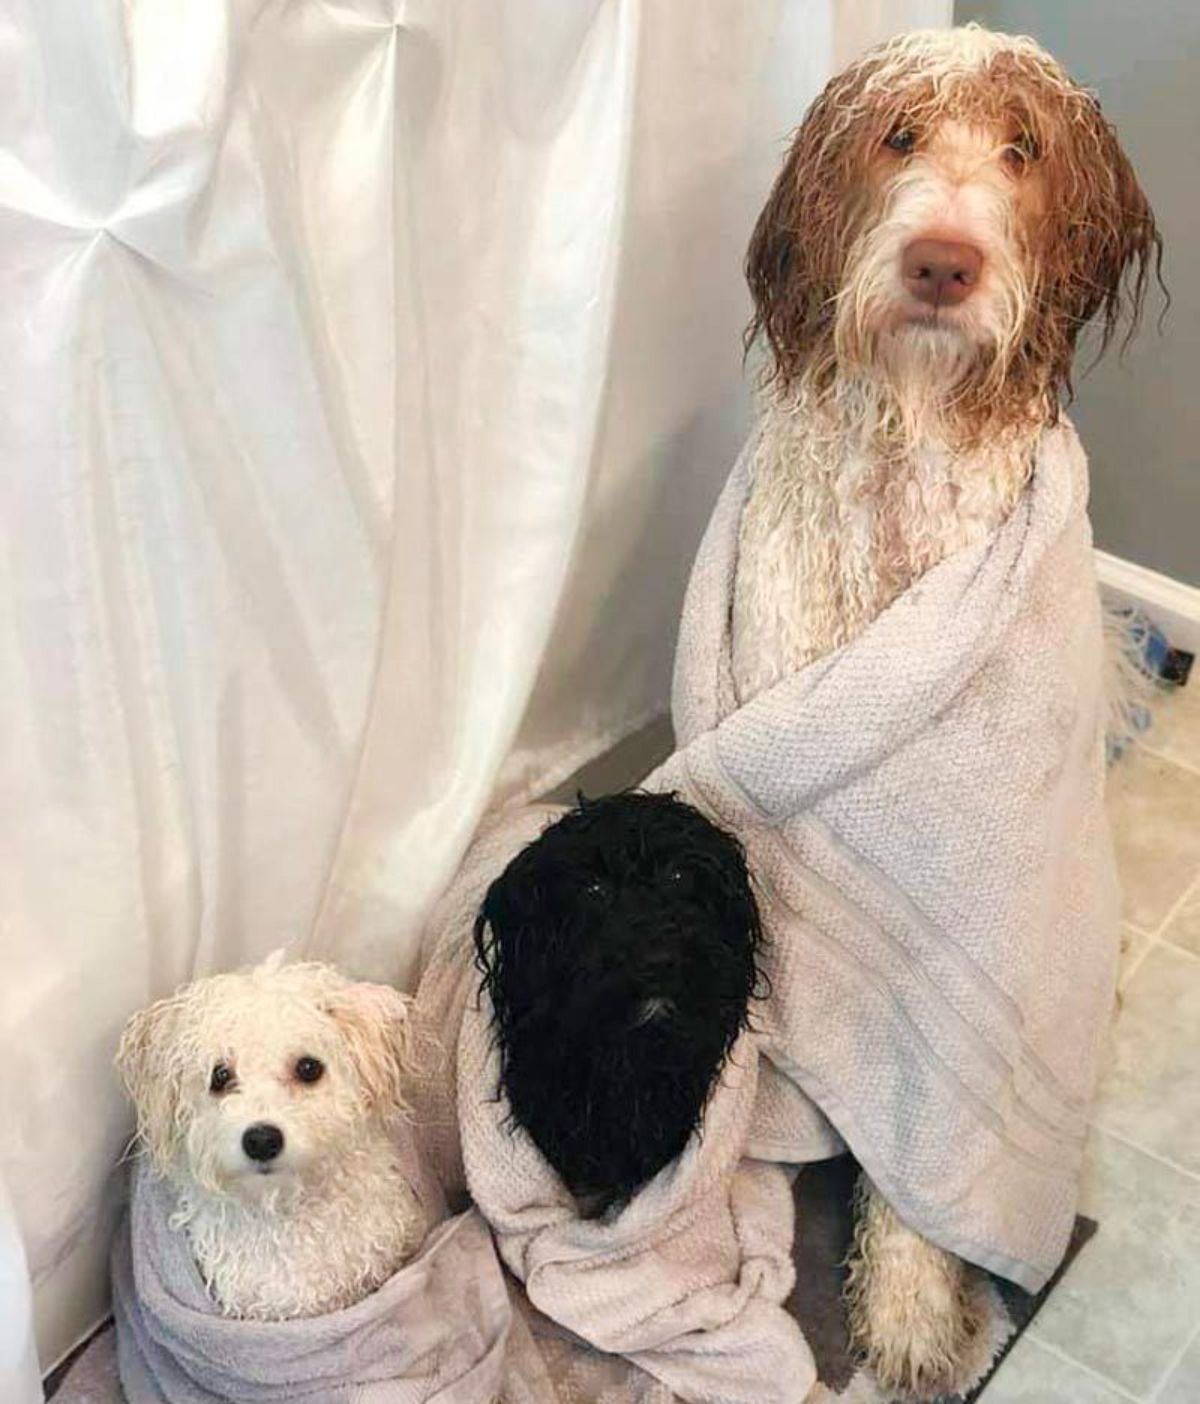 fluffy white dog, fluffy black dog, fluffy brown and white dog all wet wrapped in white towels sitting in a bathroom next to a white shower curtain